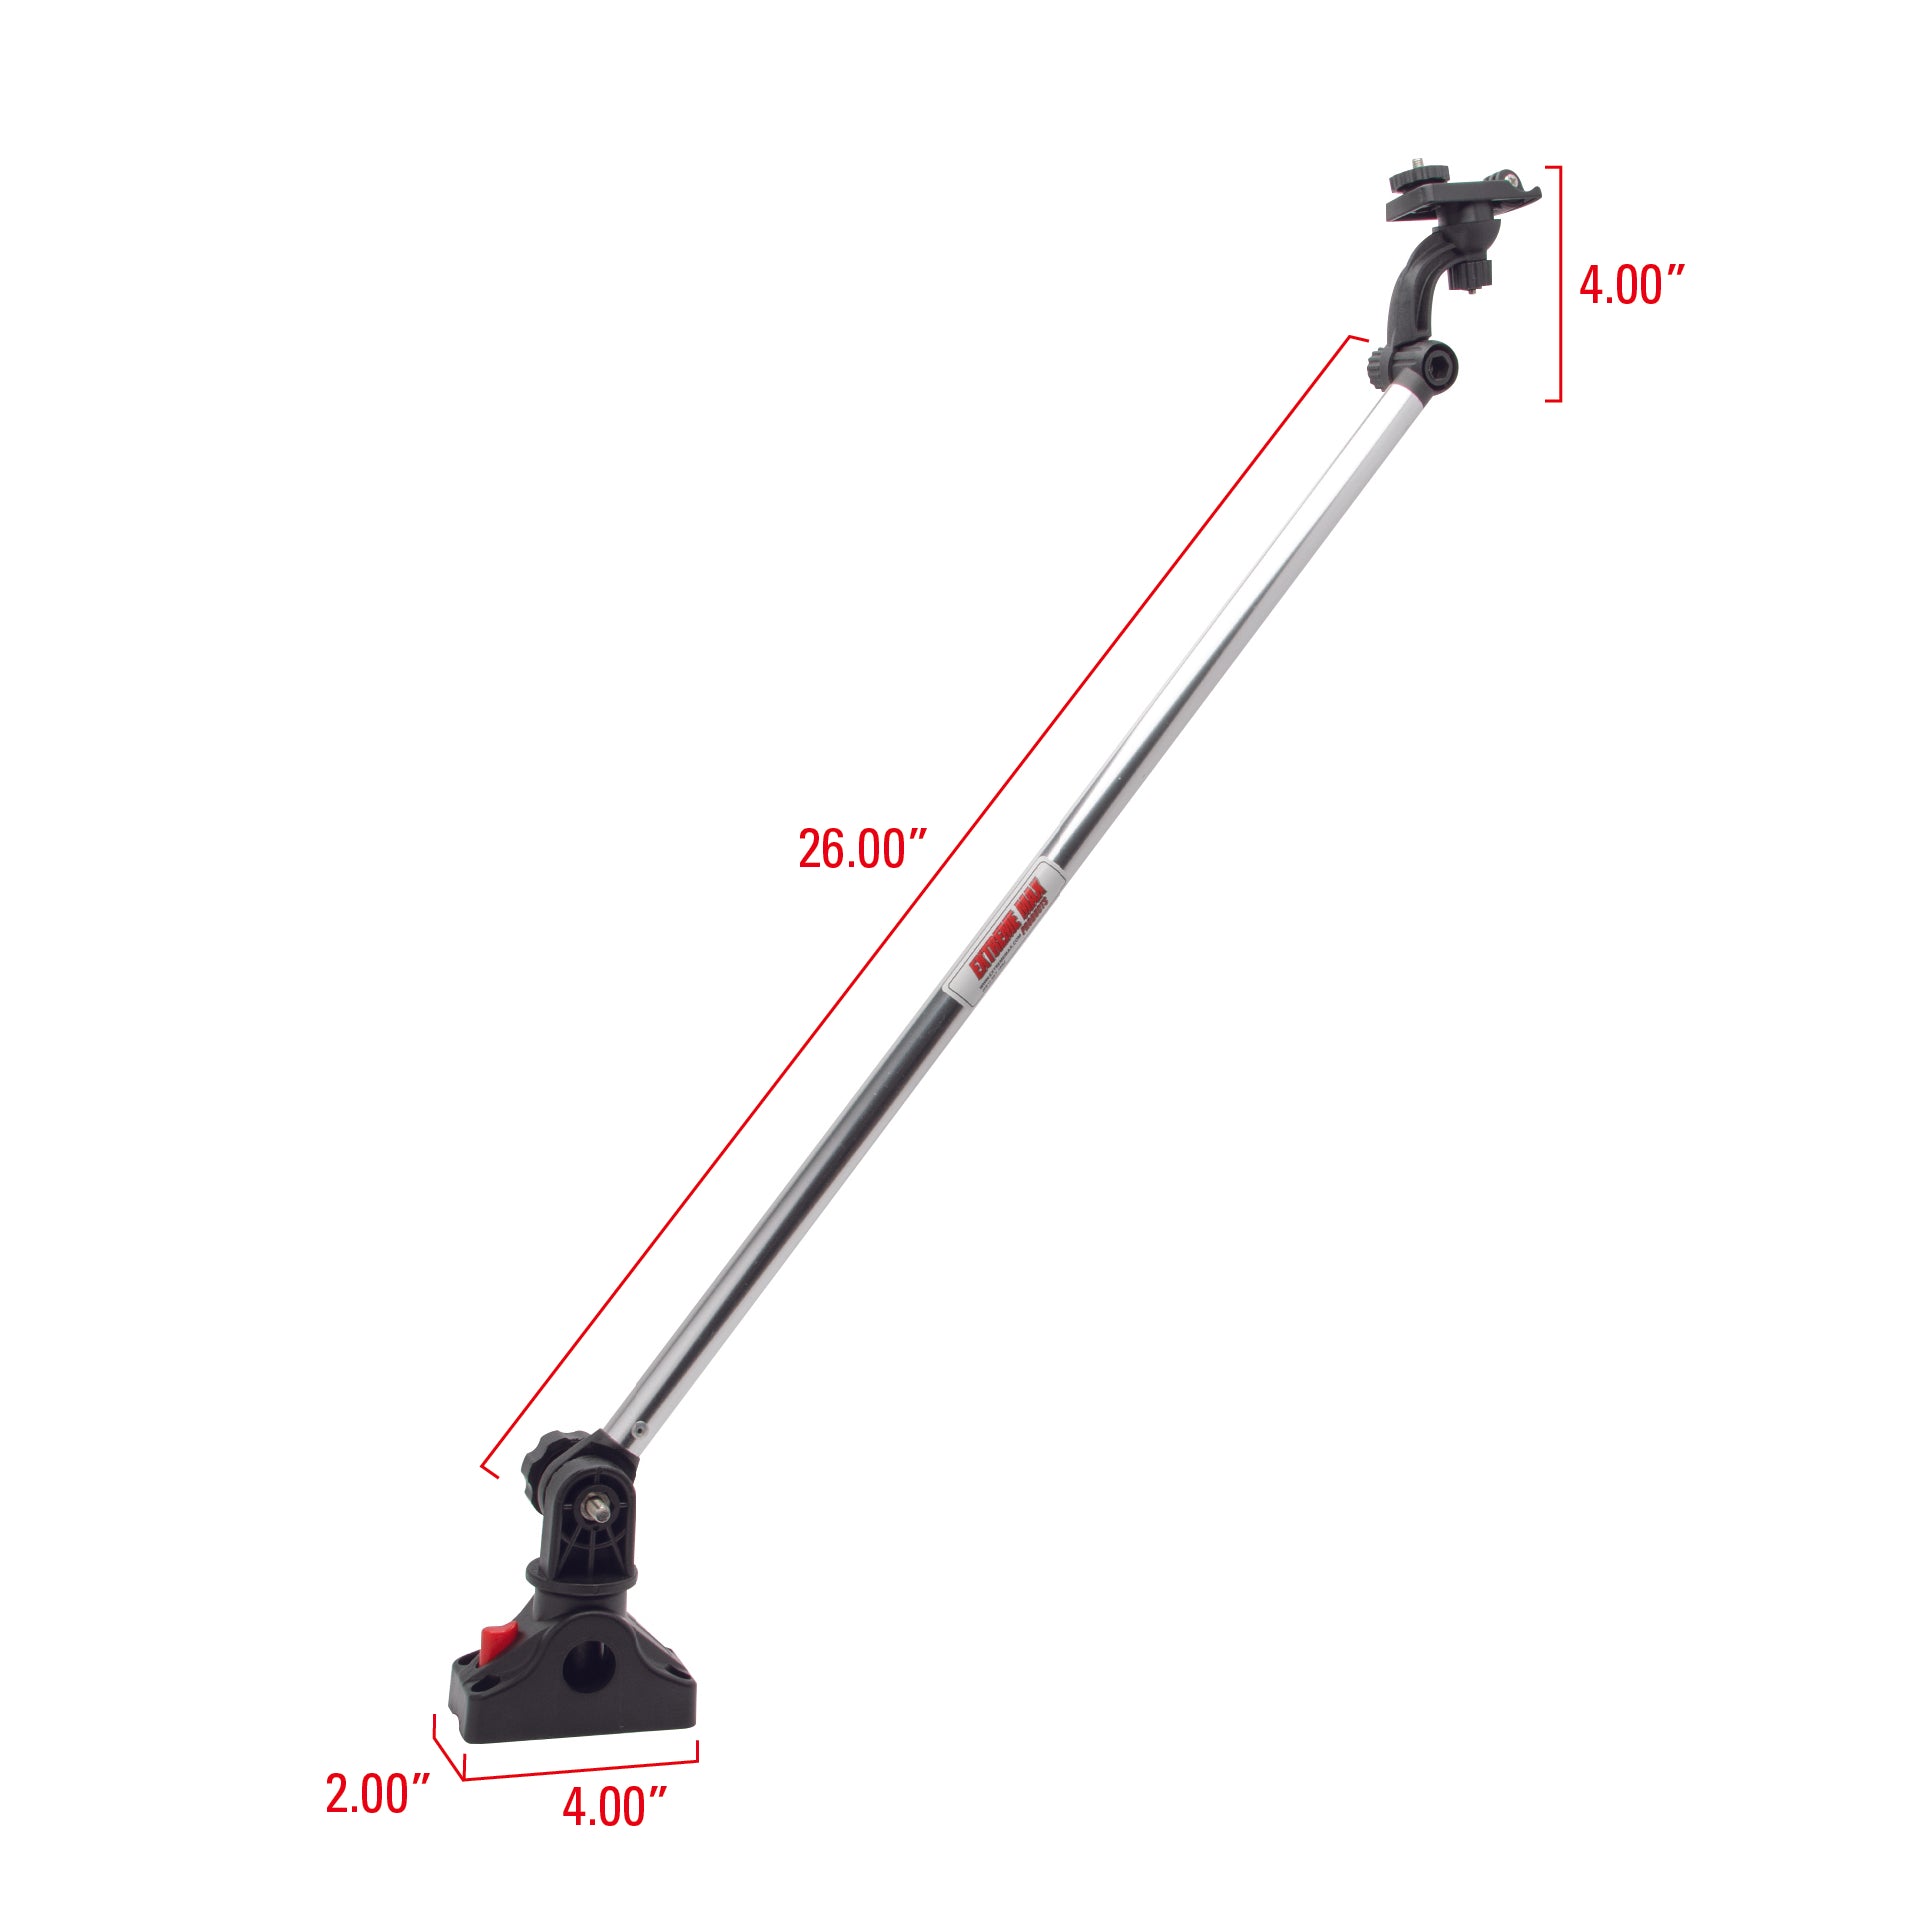 Extreme Max 3006.8672 Standard Mounting Arm for GoPro Camera - Up to 13 Reach